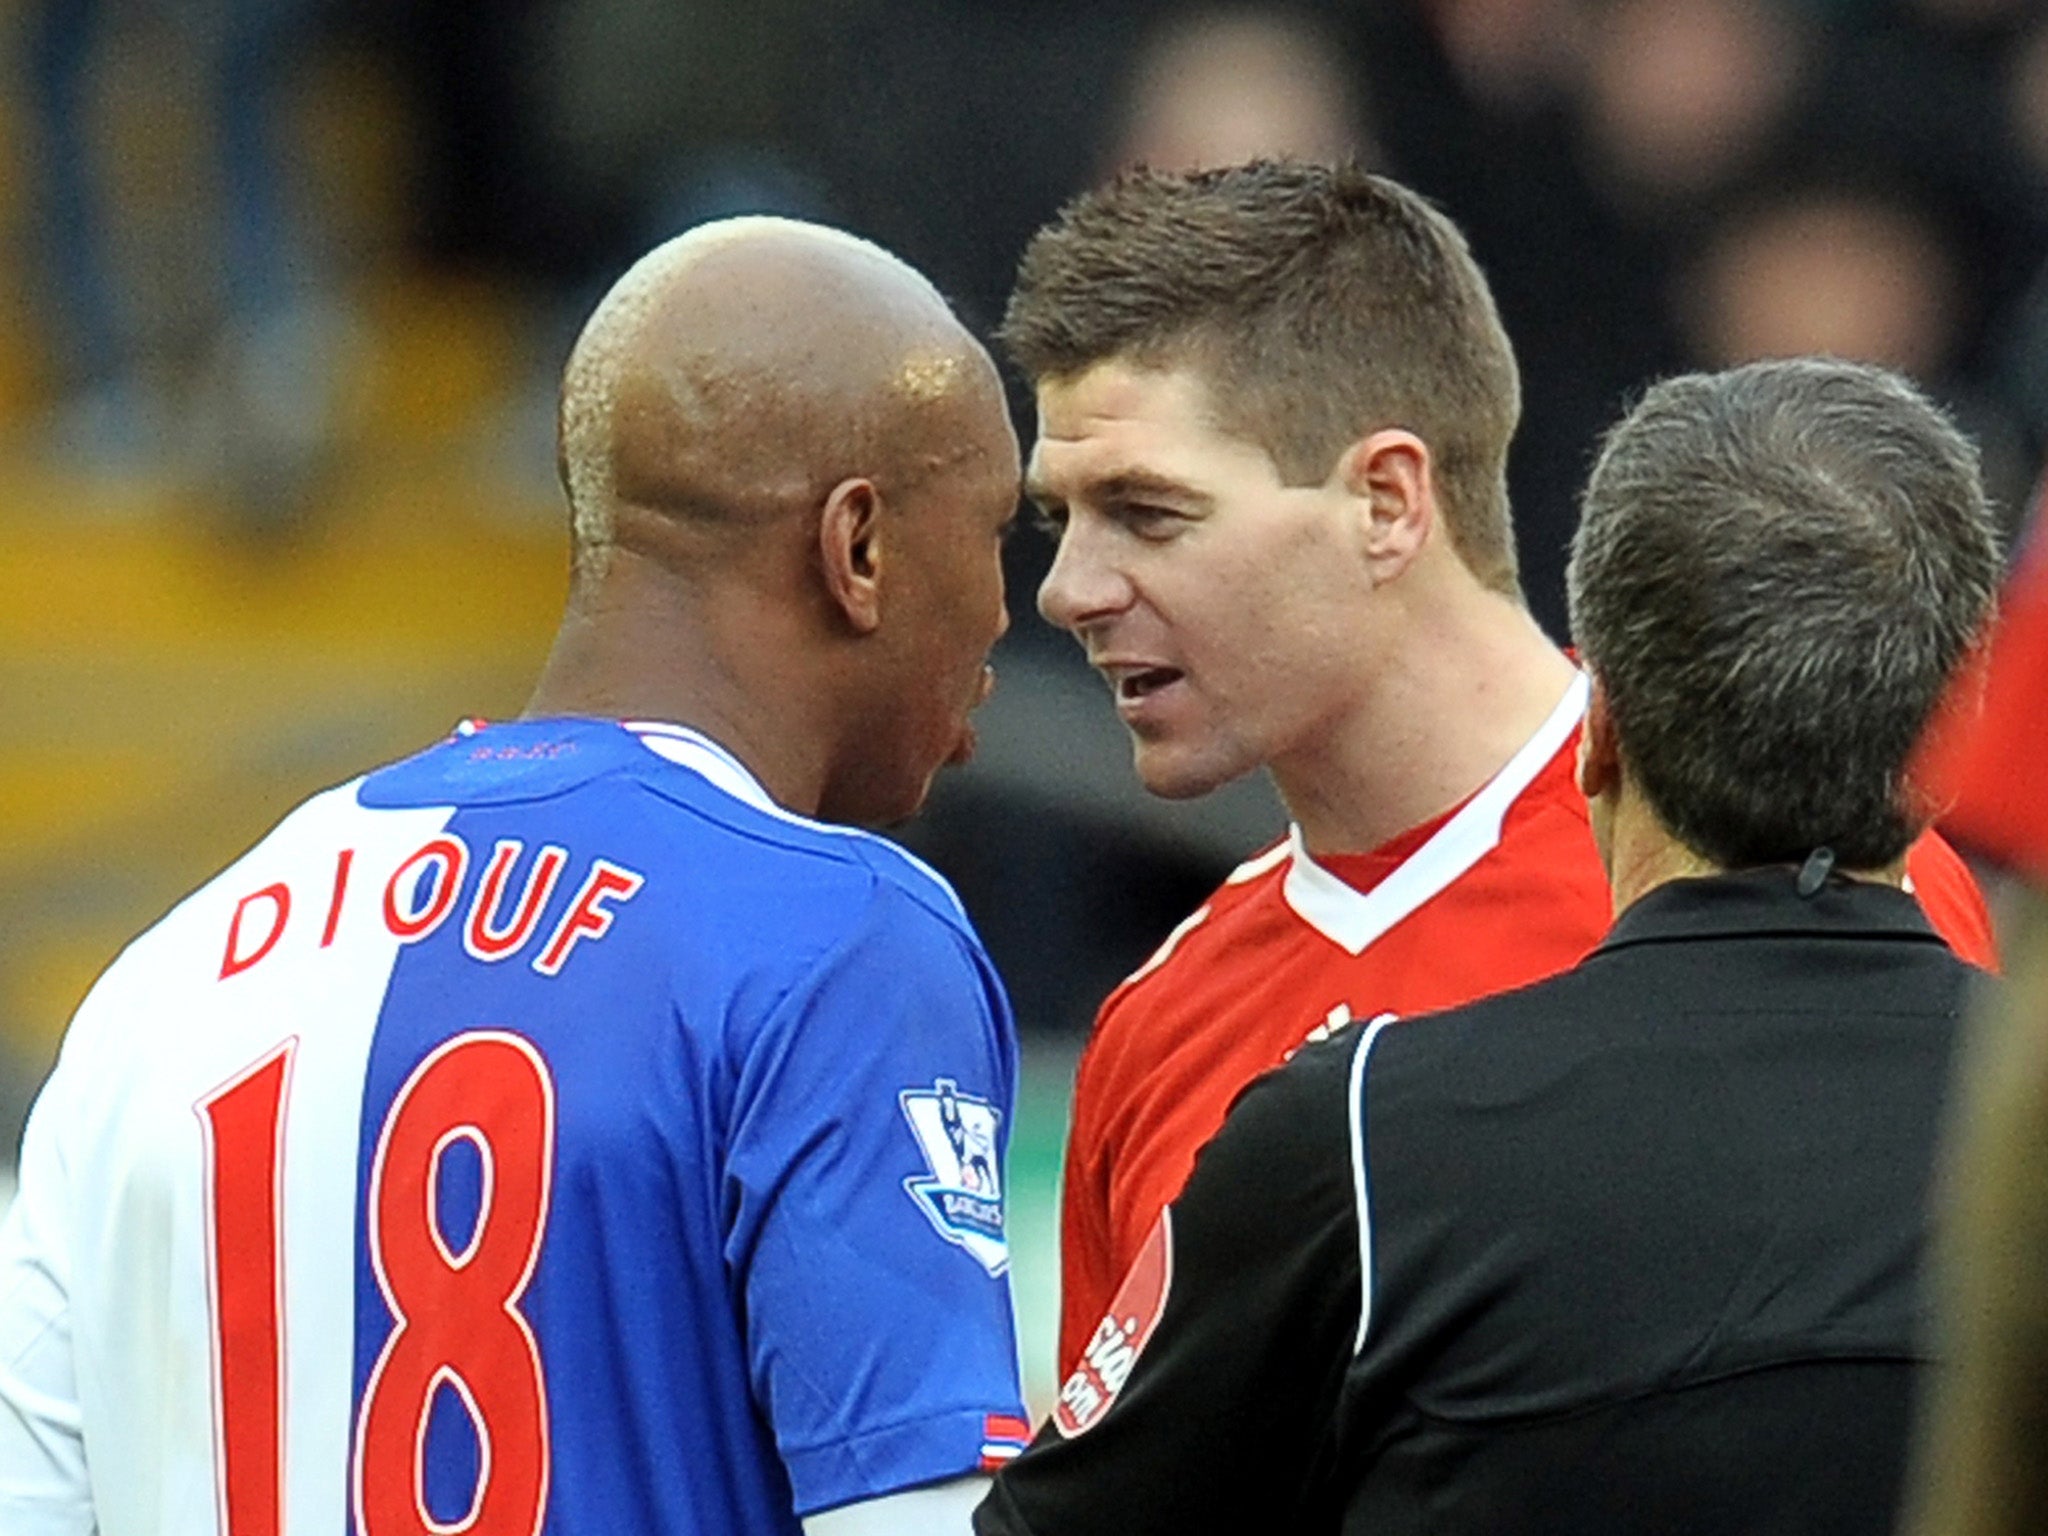 Steven Gerrard and El-Hadji Diouf confront each other during a Liverpool vs Blackburn Rovers match in 2010